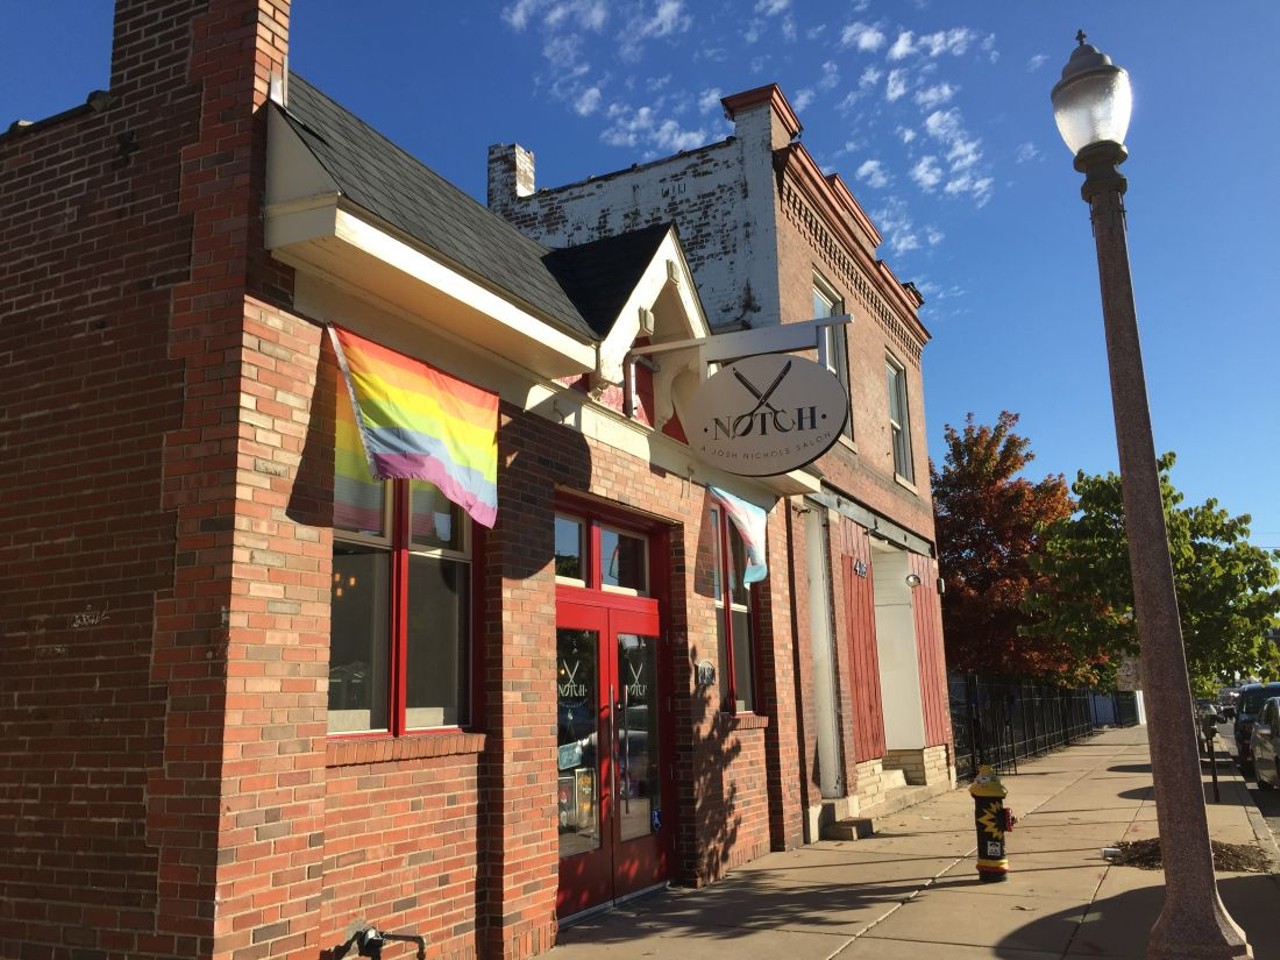 NOTCH
4187 Manchester AvenueSt. Louis, MO 63110(314) 764-5113
The pride flags outside this salon let you know that you are welcome here. Inside are a number of inclusive options, including a hairstyle menu that doesn't separate "men's" and "women's" styles. It's been said before, but Notch is really a cut above the rest.
Photo courtesy of Jaime Lees